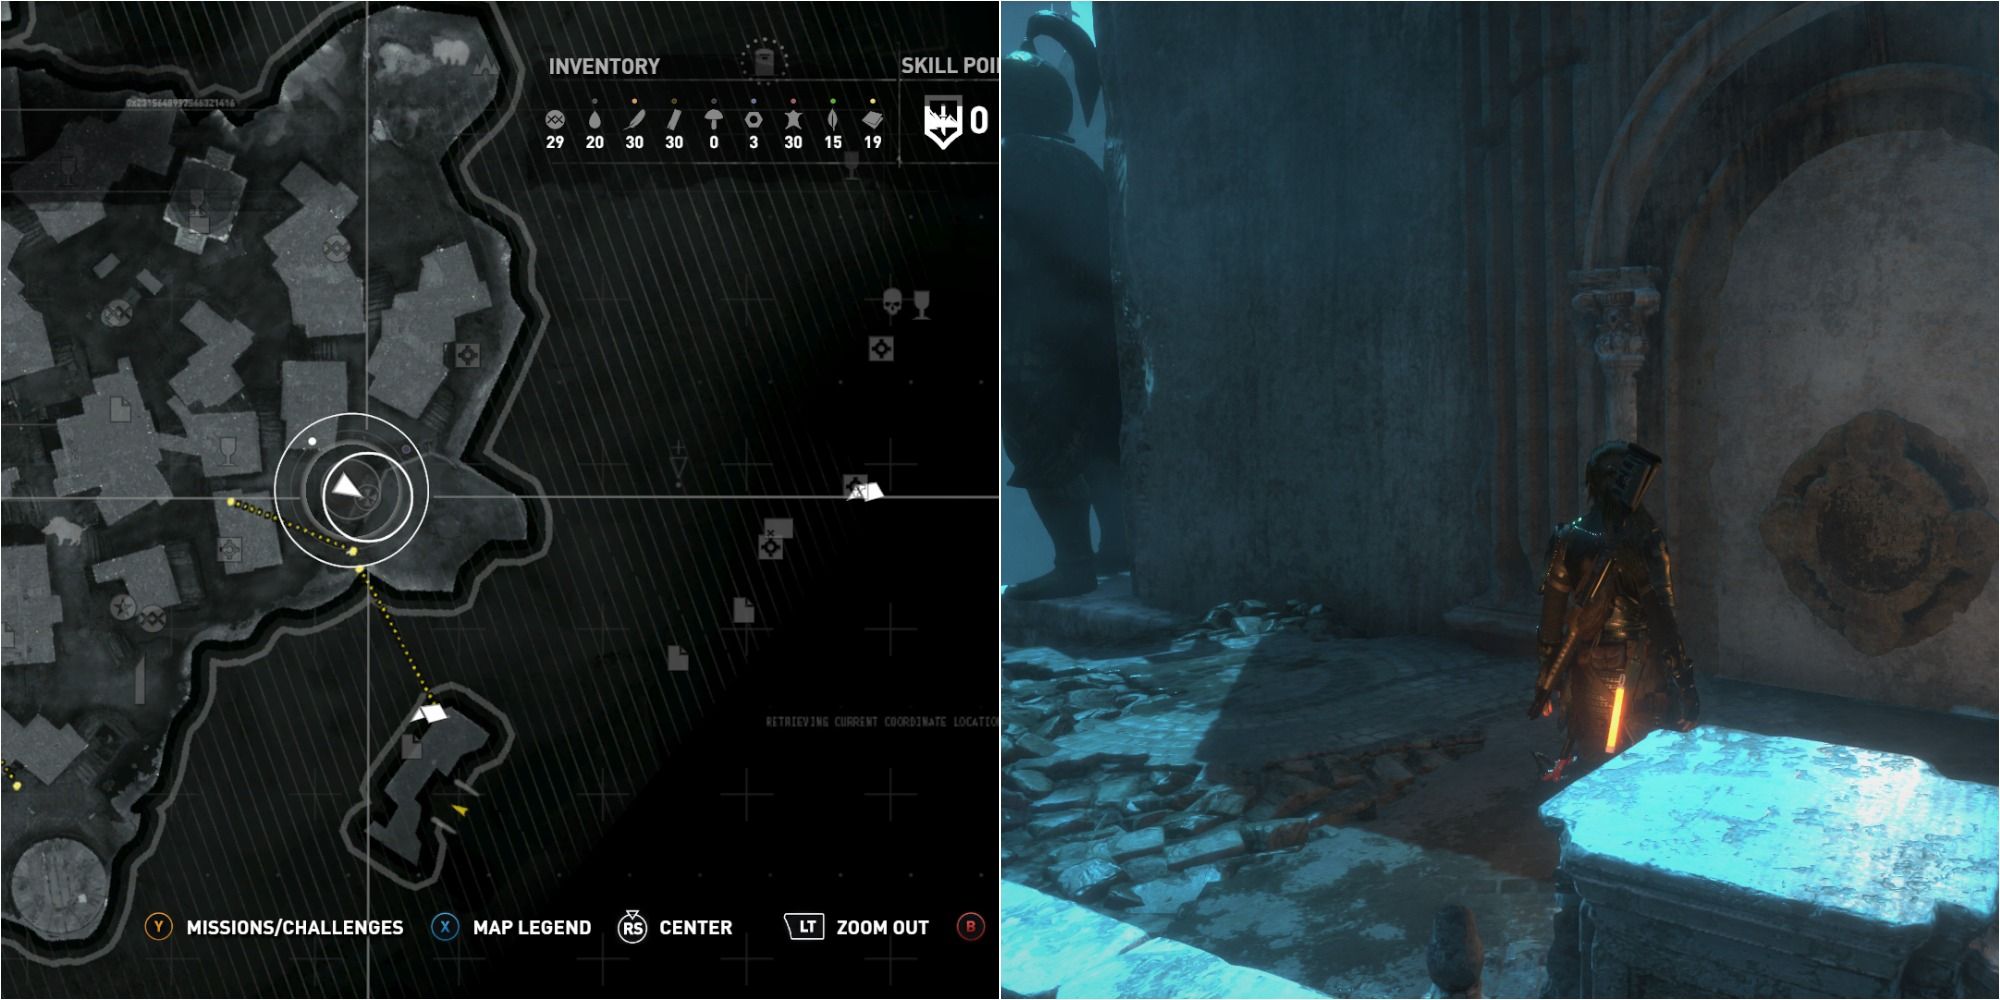 Rise Of The Tomb Raider Split Image Showing The Lost City Mural One Location